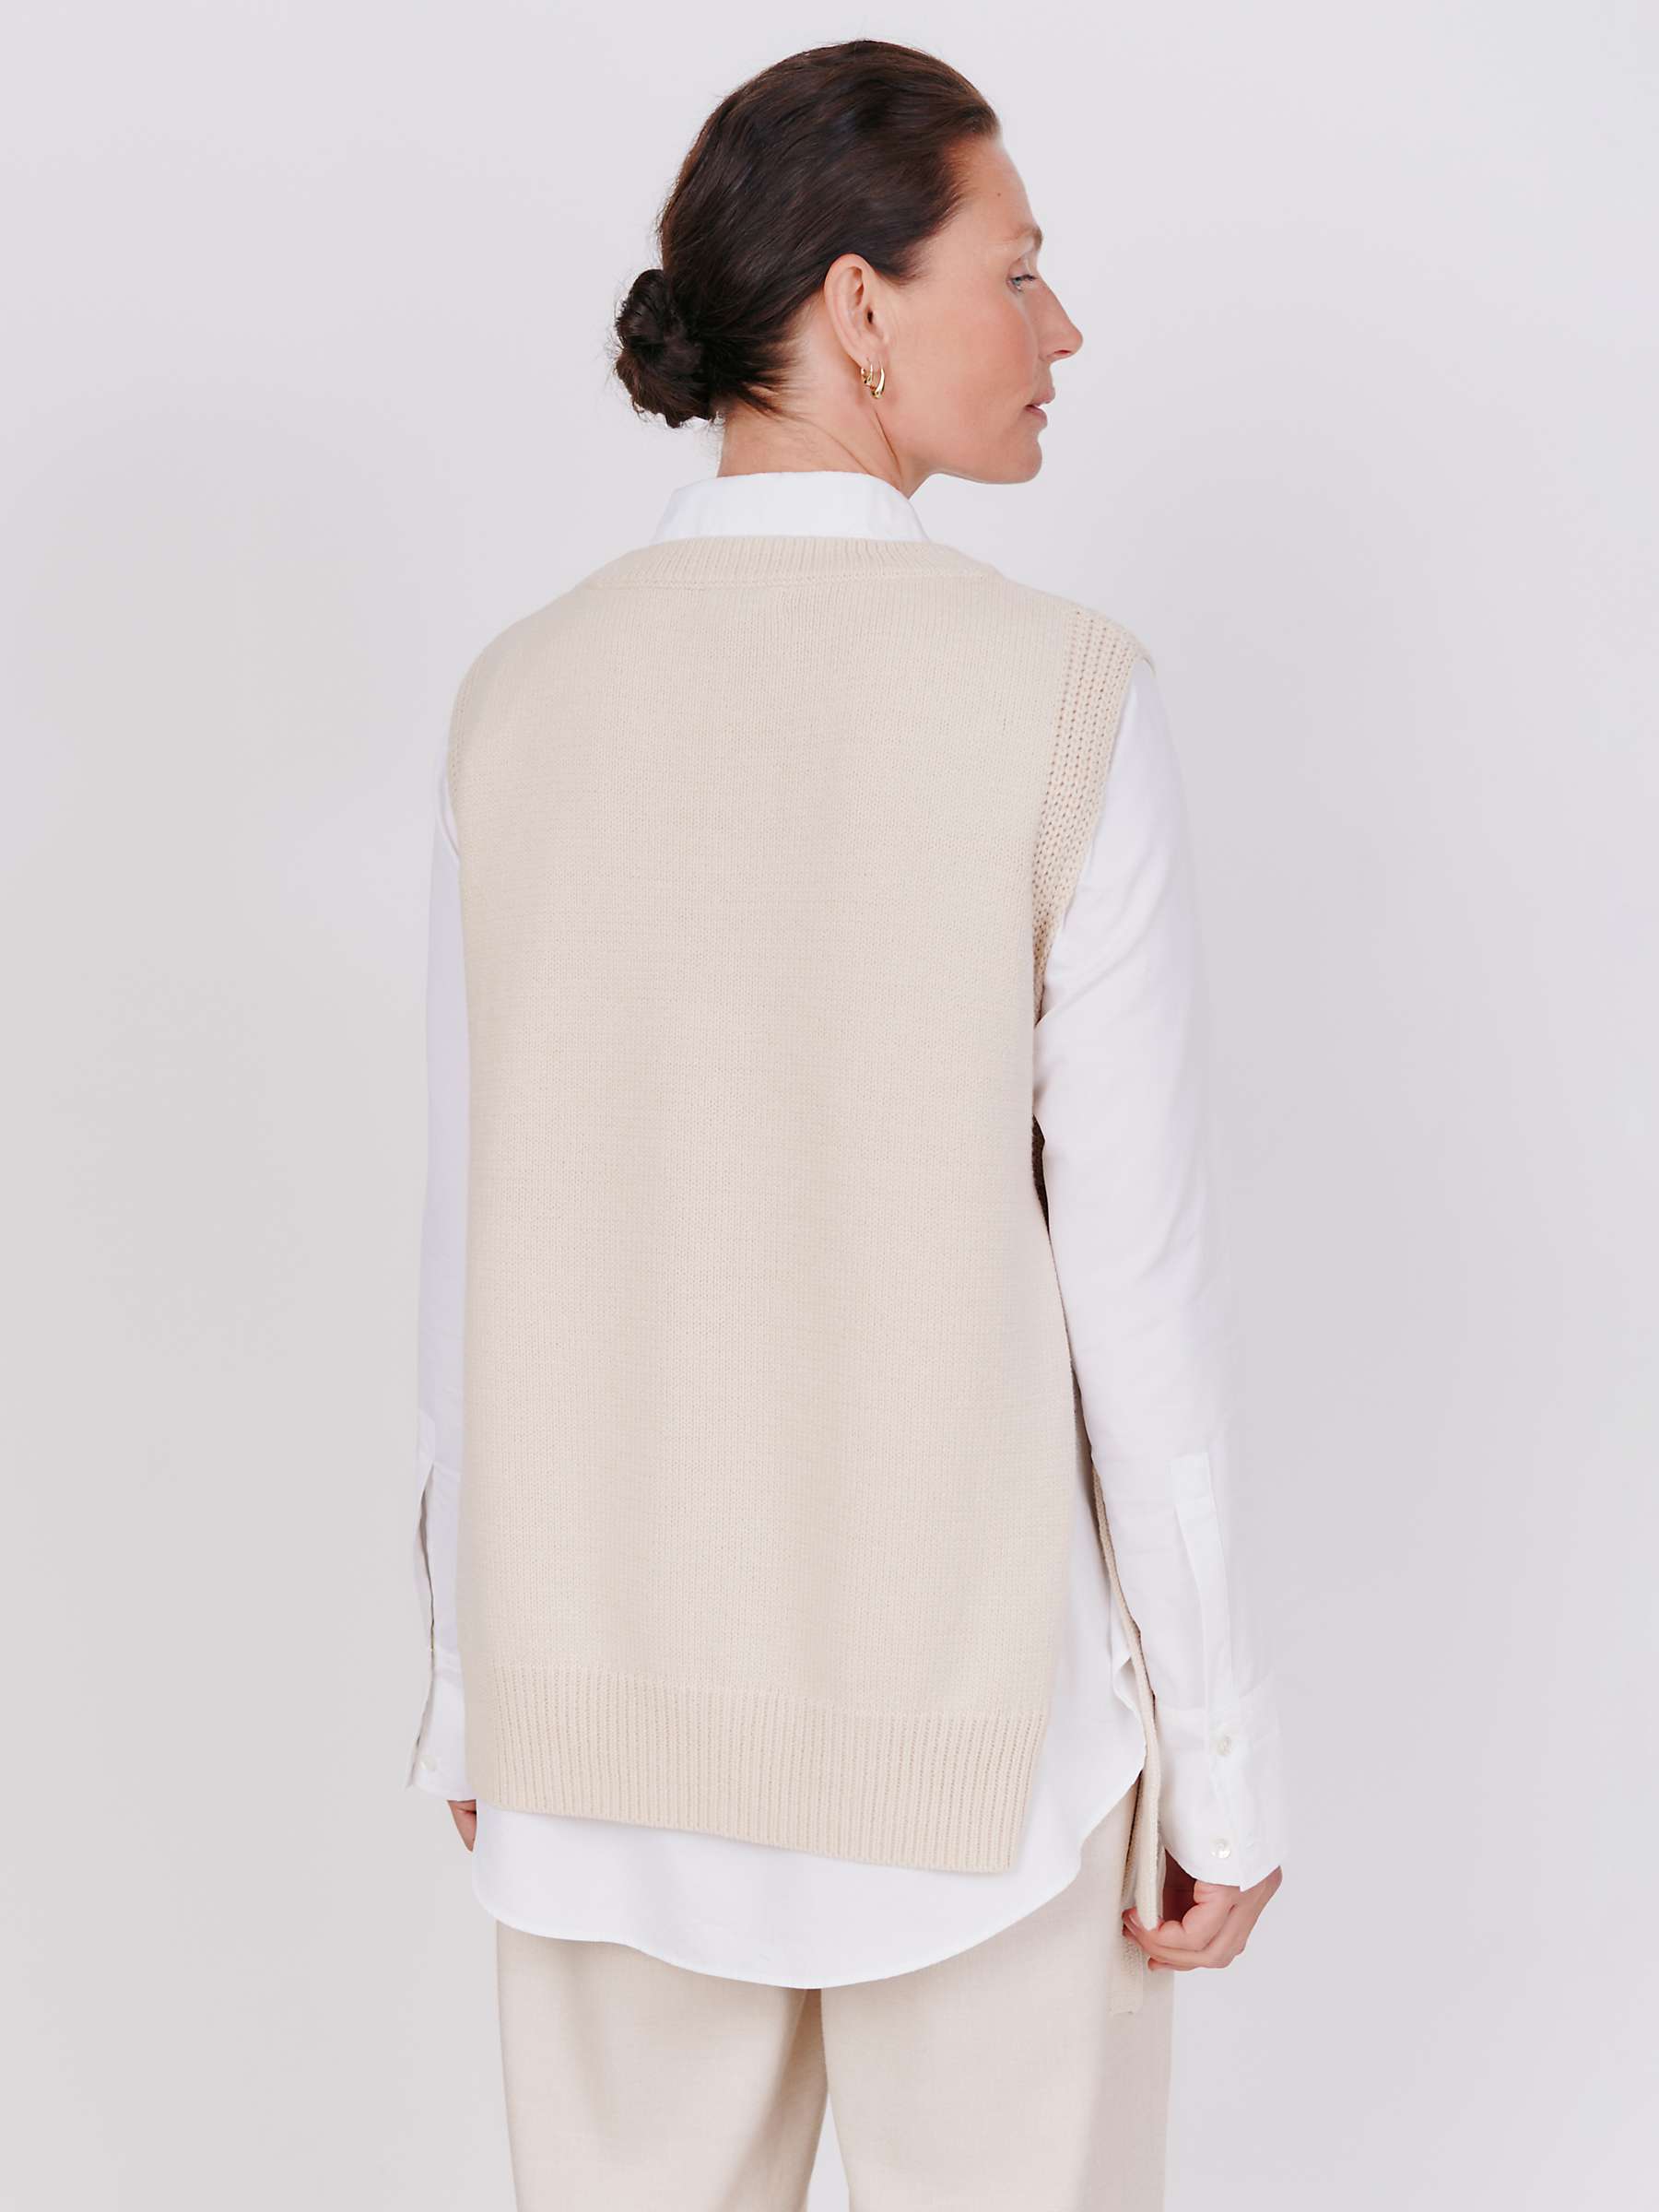 Buy Vivere By Savannah Miller Charlotte Tabard Knit Top, Oatmeal Online at johnlewis.com